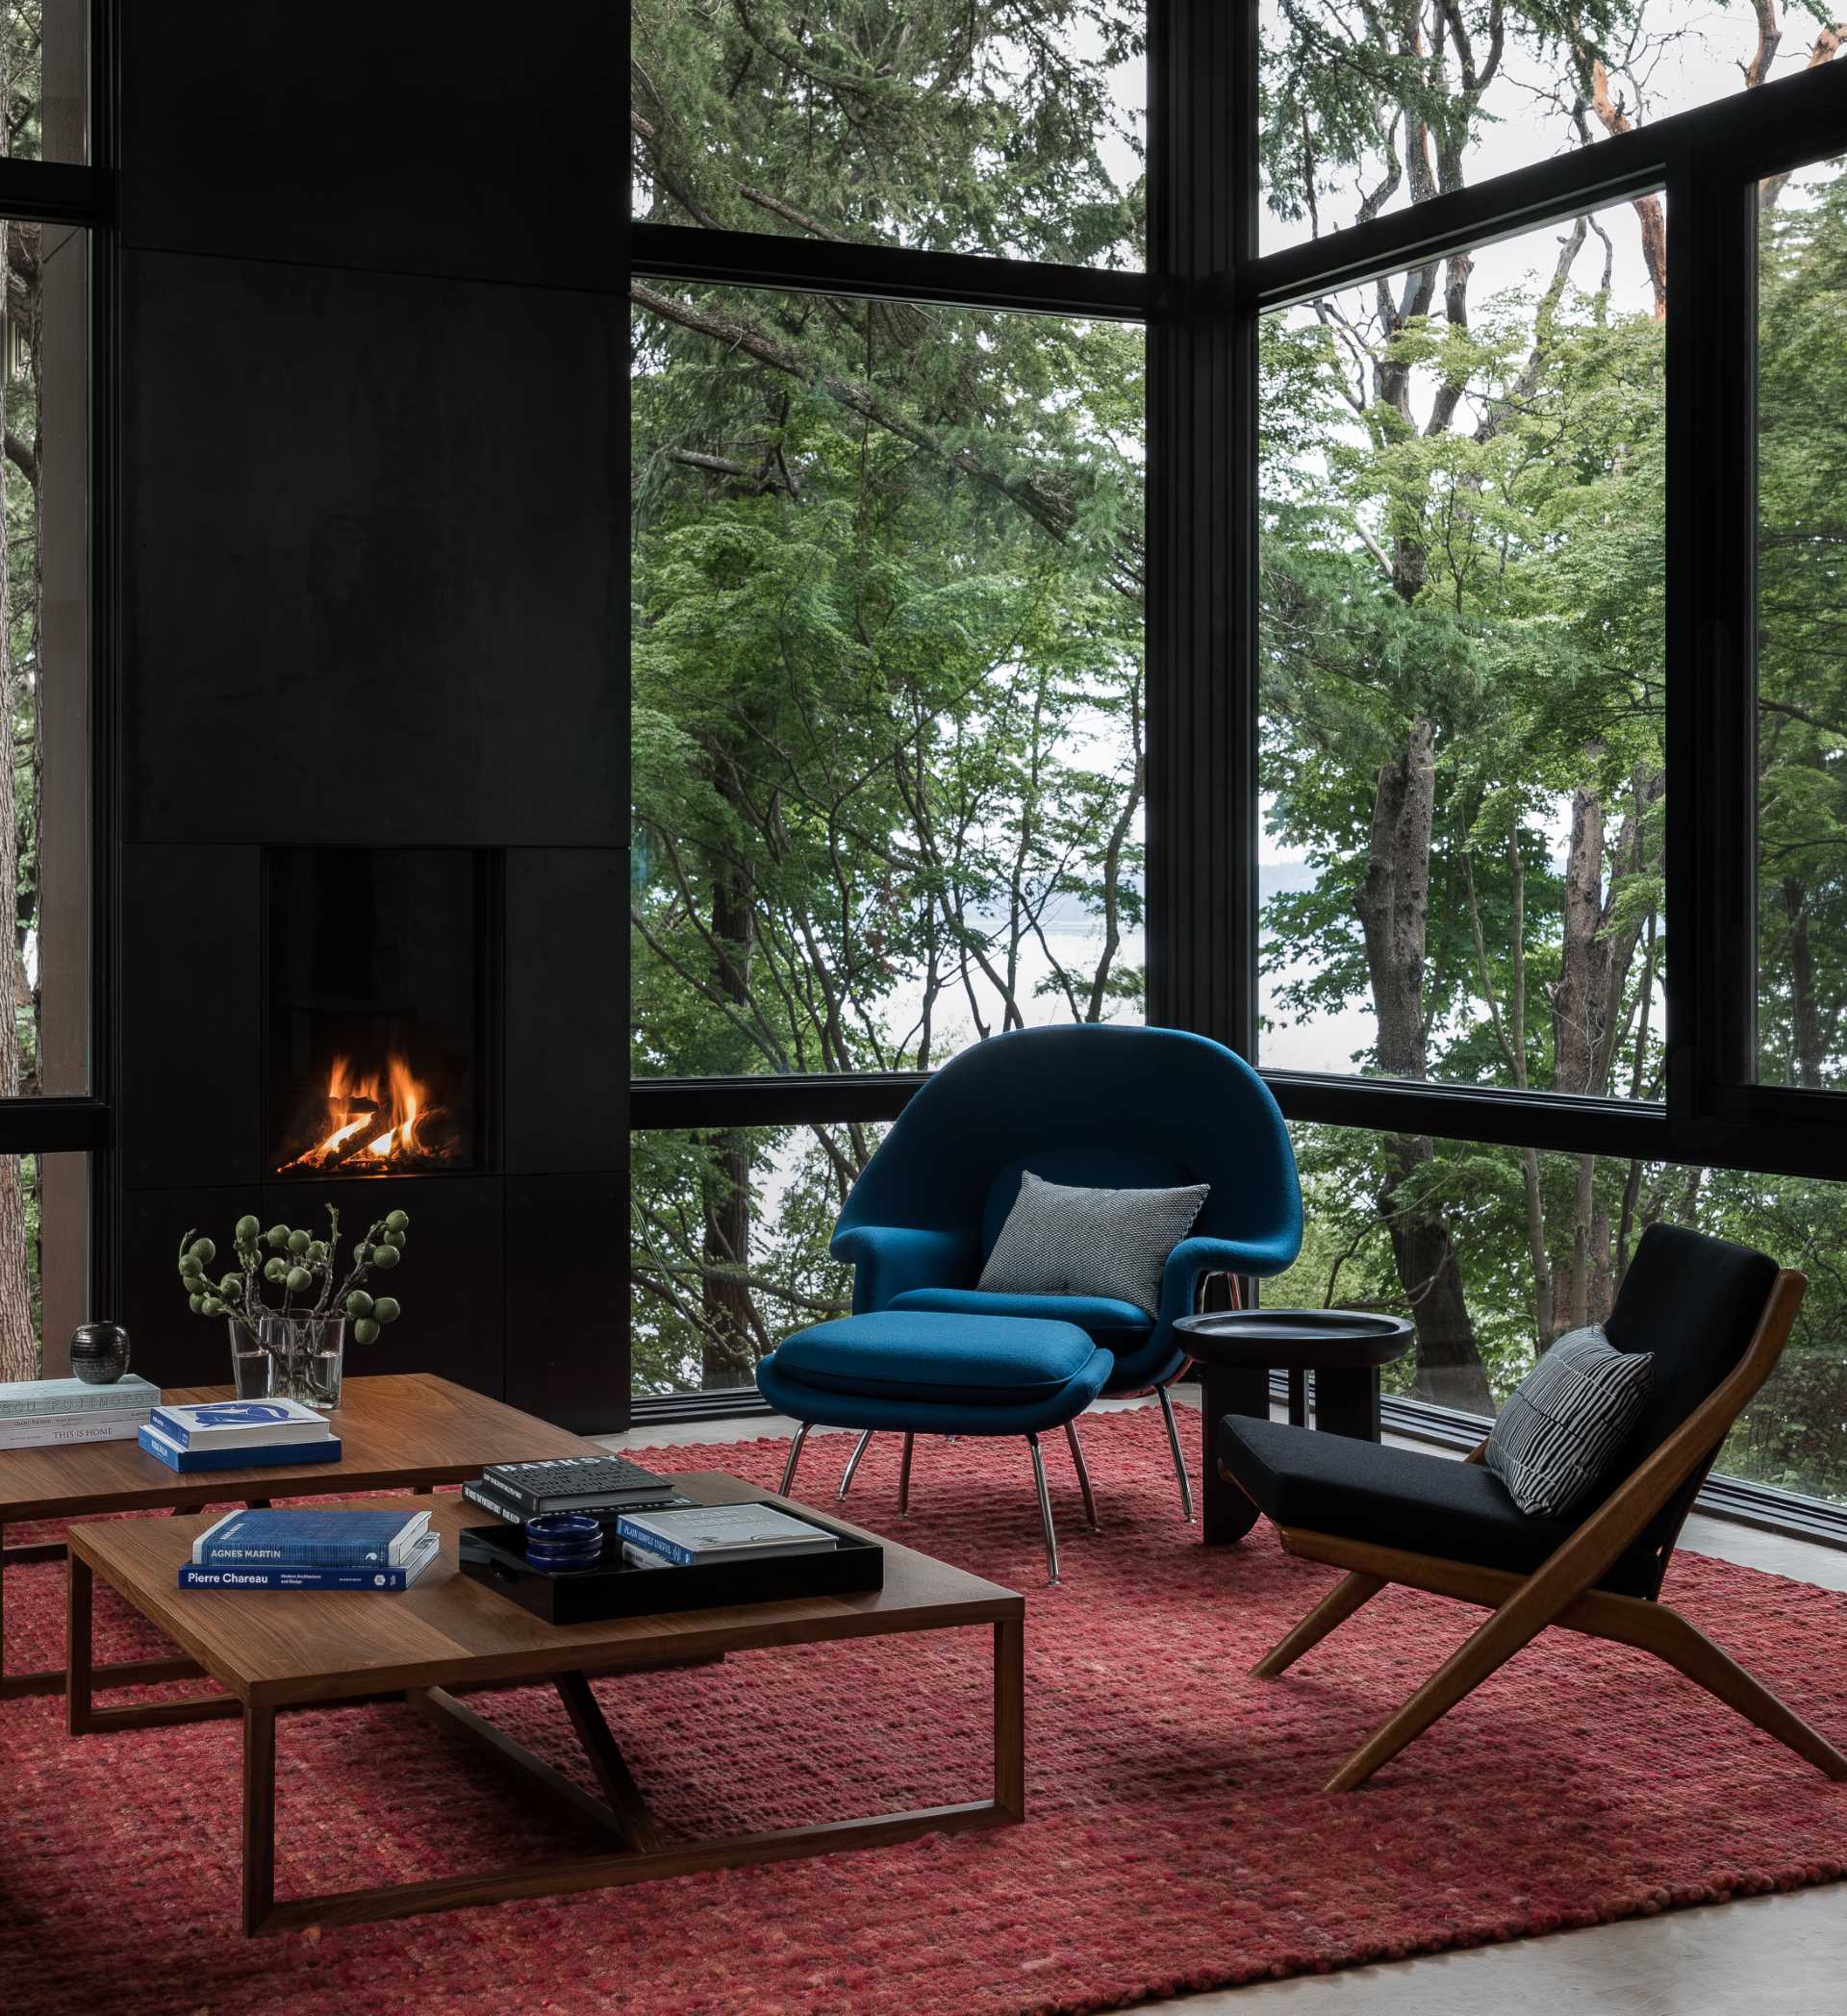 A floating living room extends away from the home and is surrounded by tree and water views. A fireplace adds a sense of warmth, while colors add vibrancy to the space.